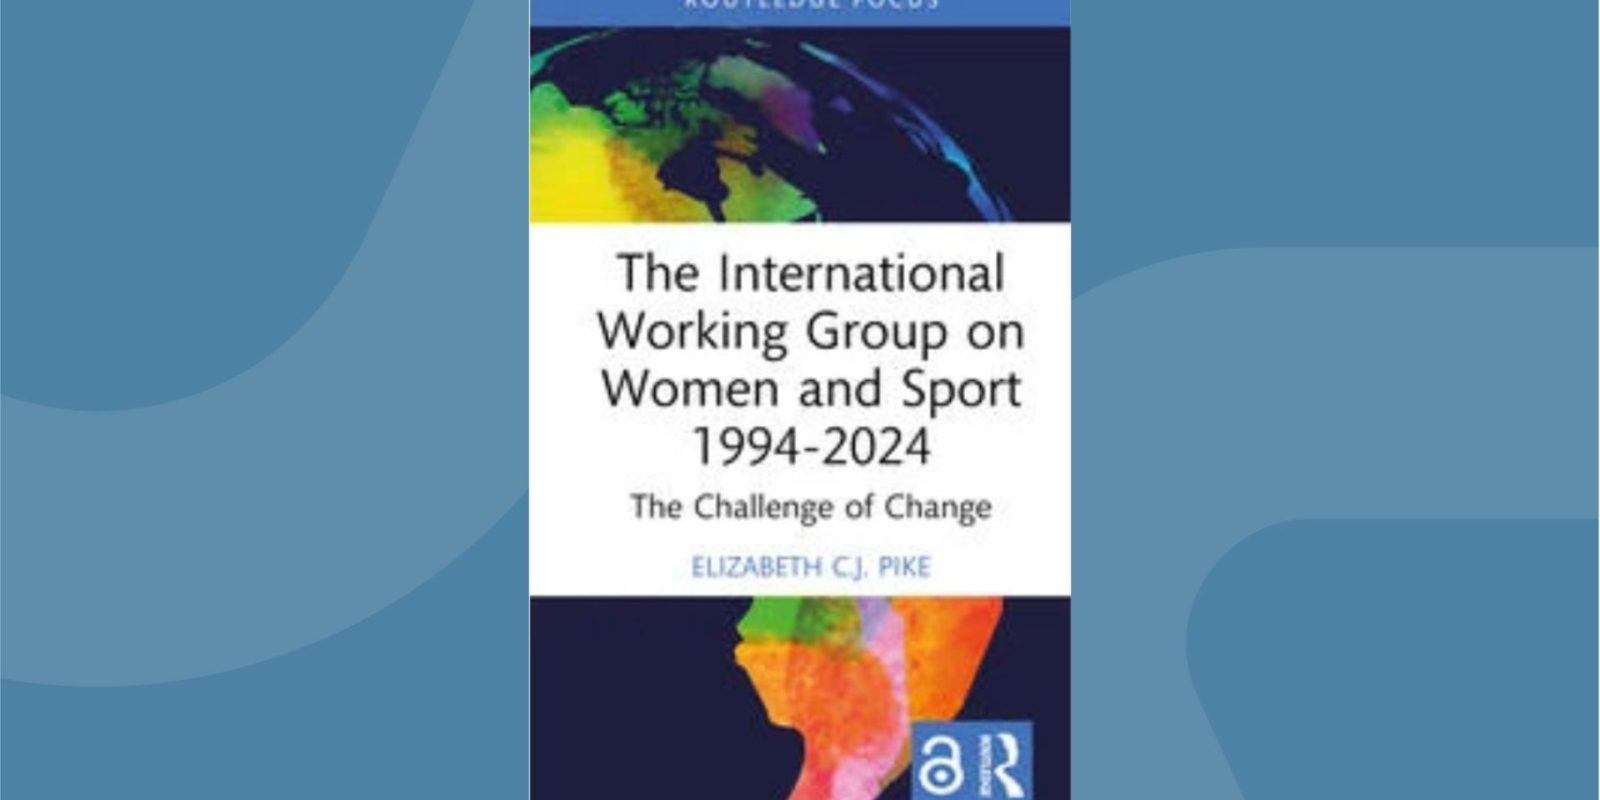 Cover of new book by Professor Elizabeth Pike “The International Working Group on Women and Sport 1994-2024: The Challenge of Change”